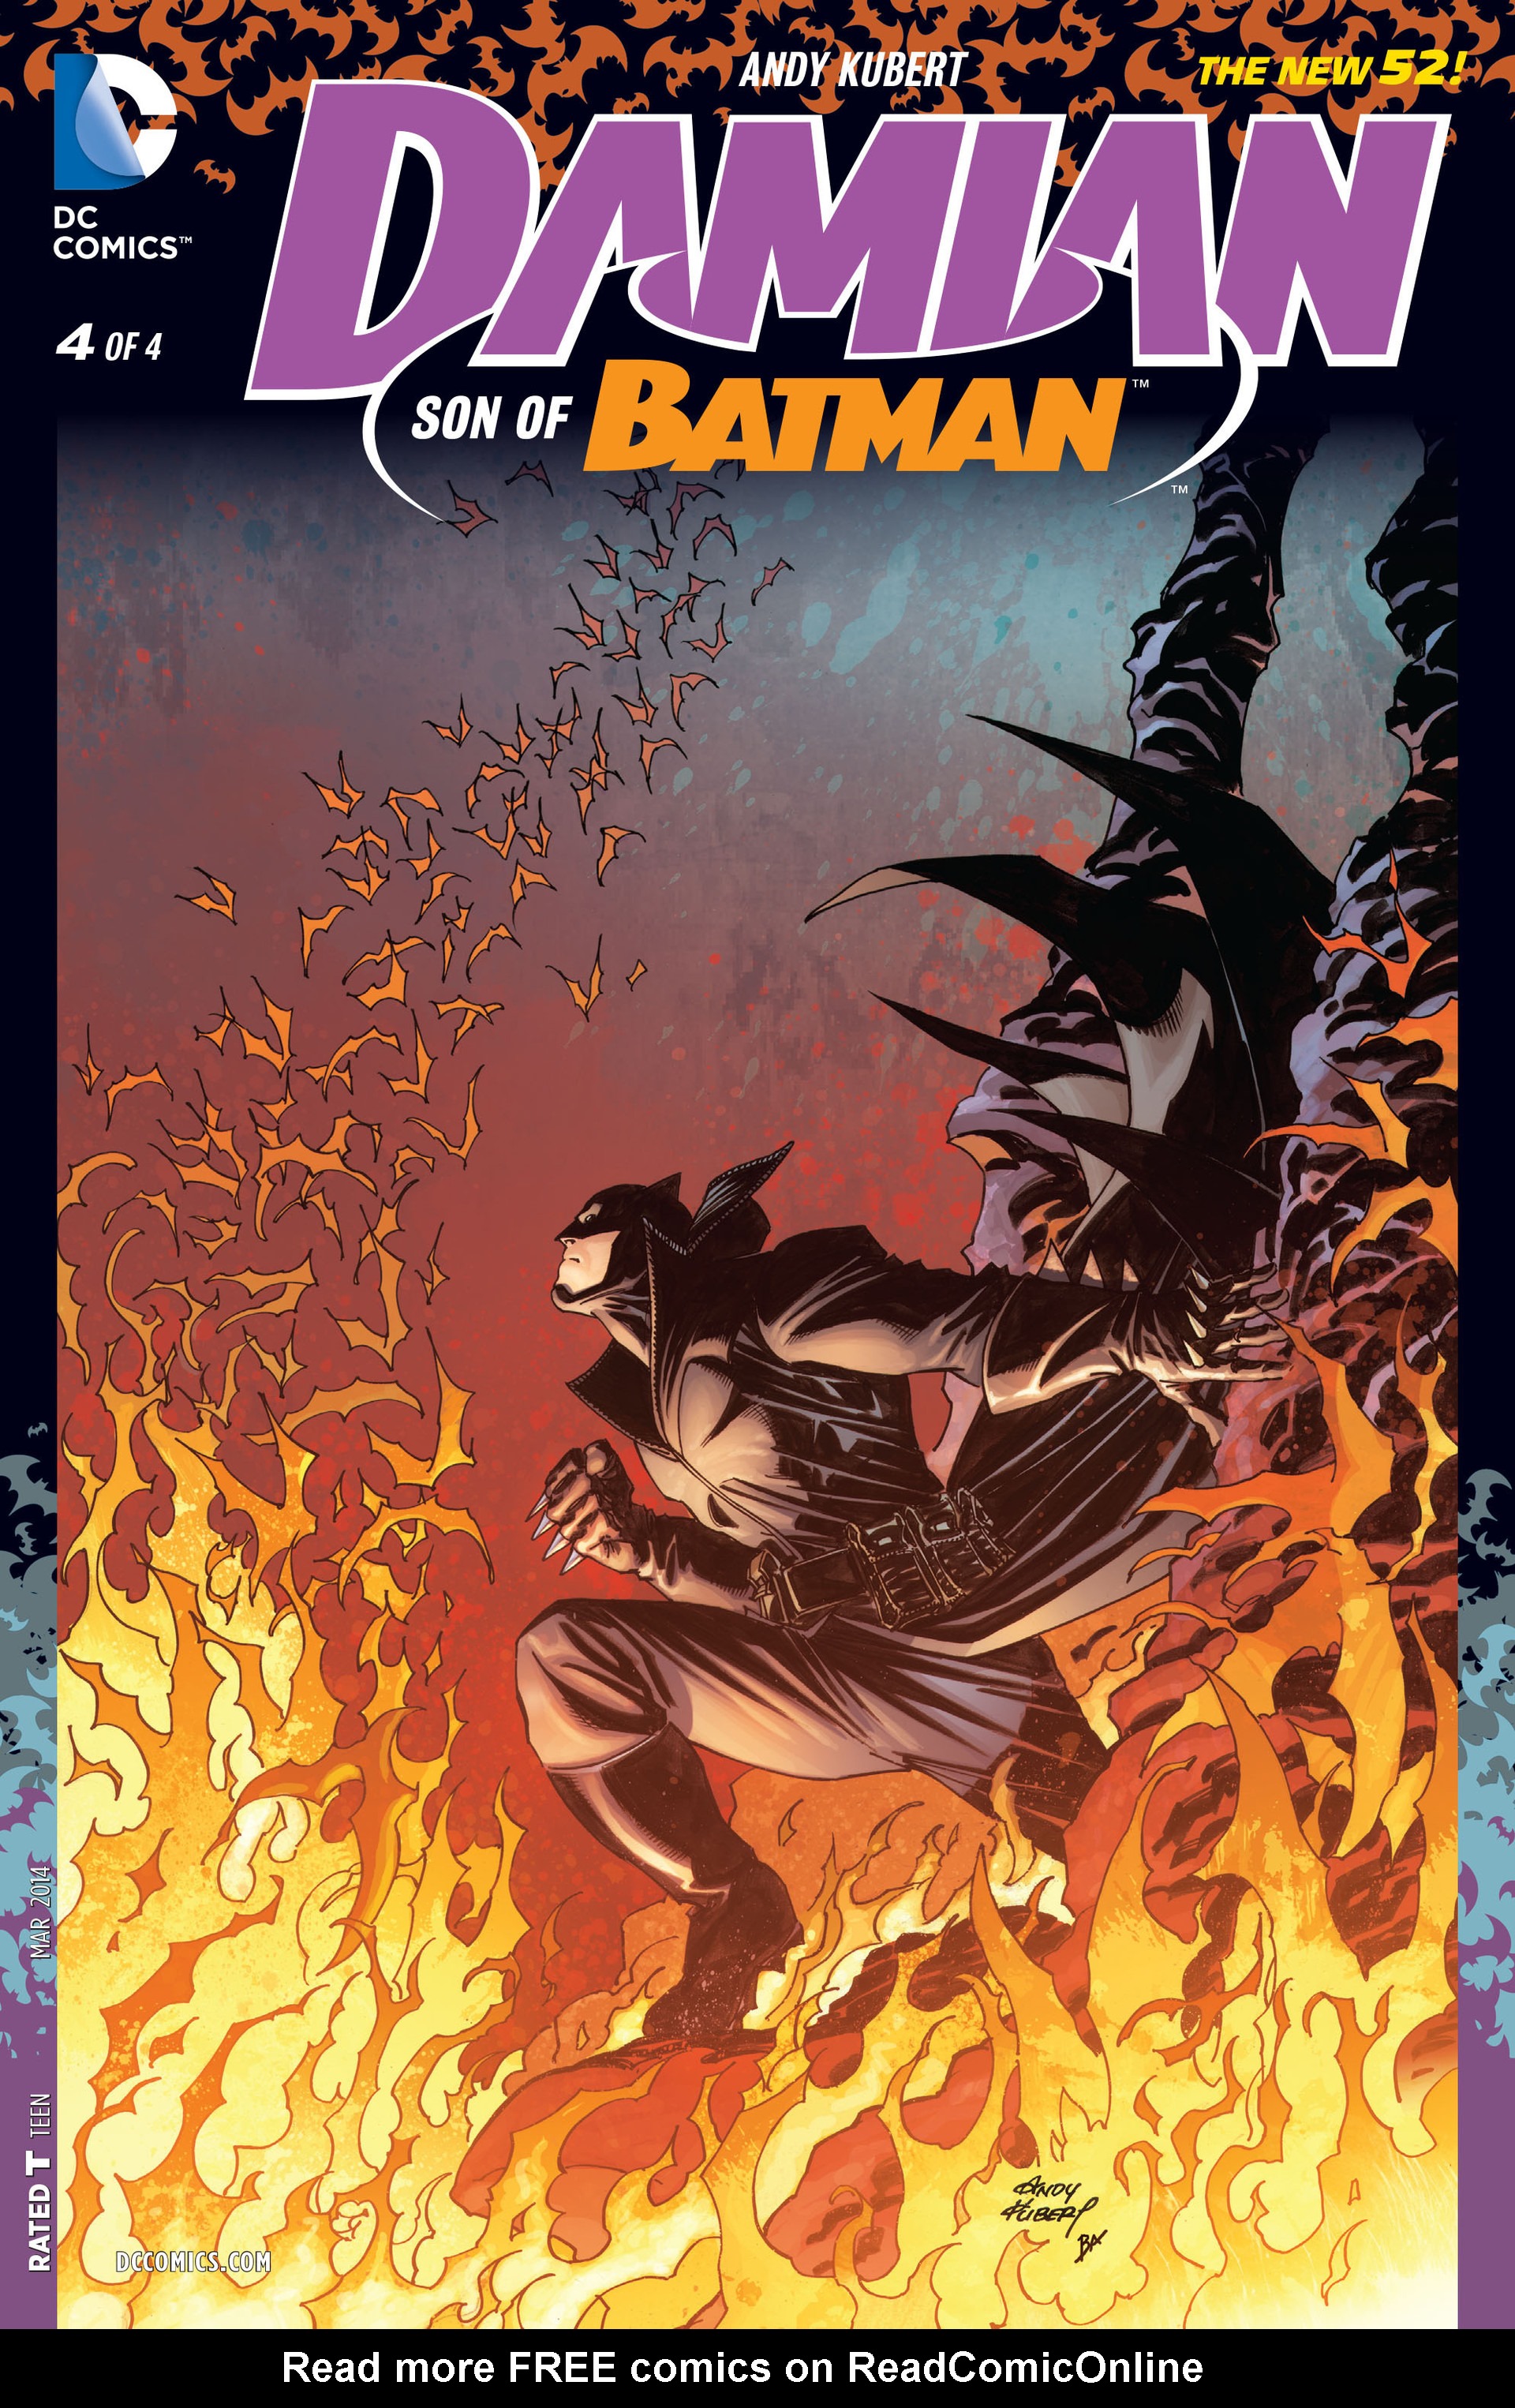 Damian Son Of Batman Issue 4 | Read Damian Son Of Batman Issue 4 comic  online in high quality. Read Full Comic online for free - Read comics online  in high quality .|